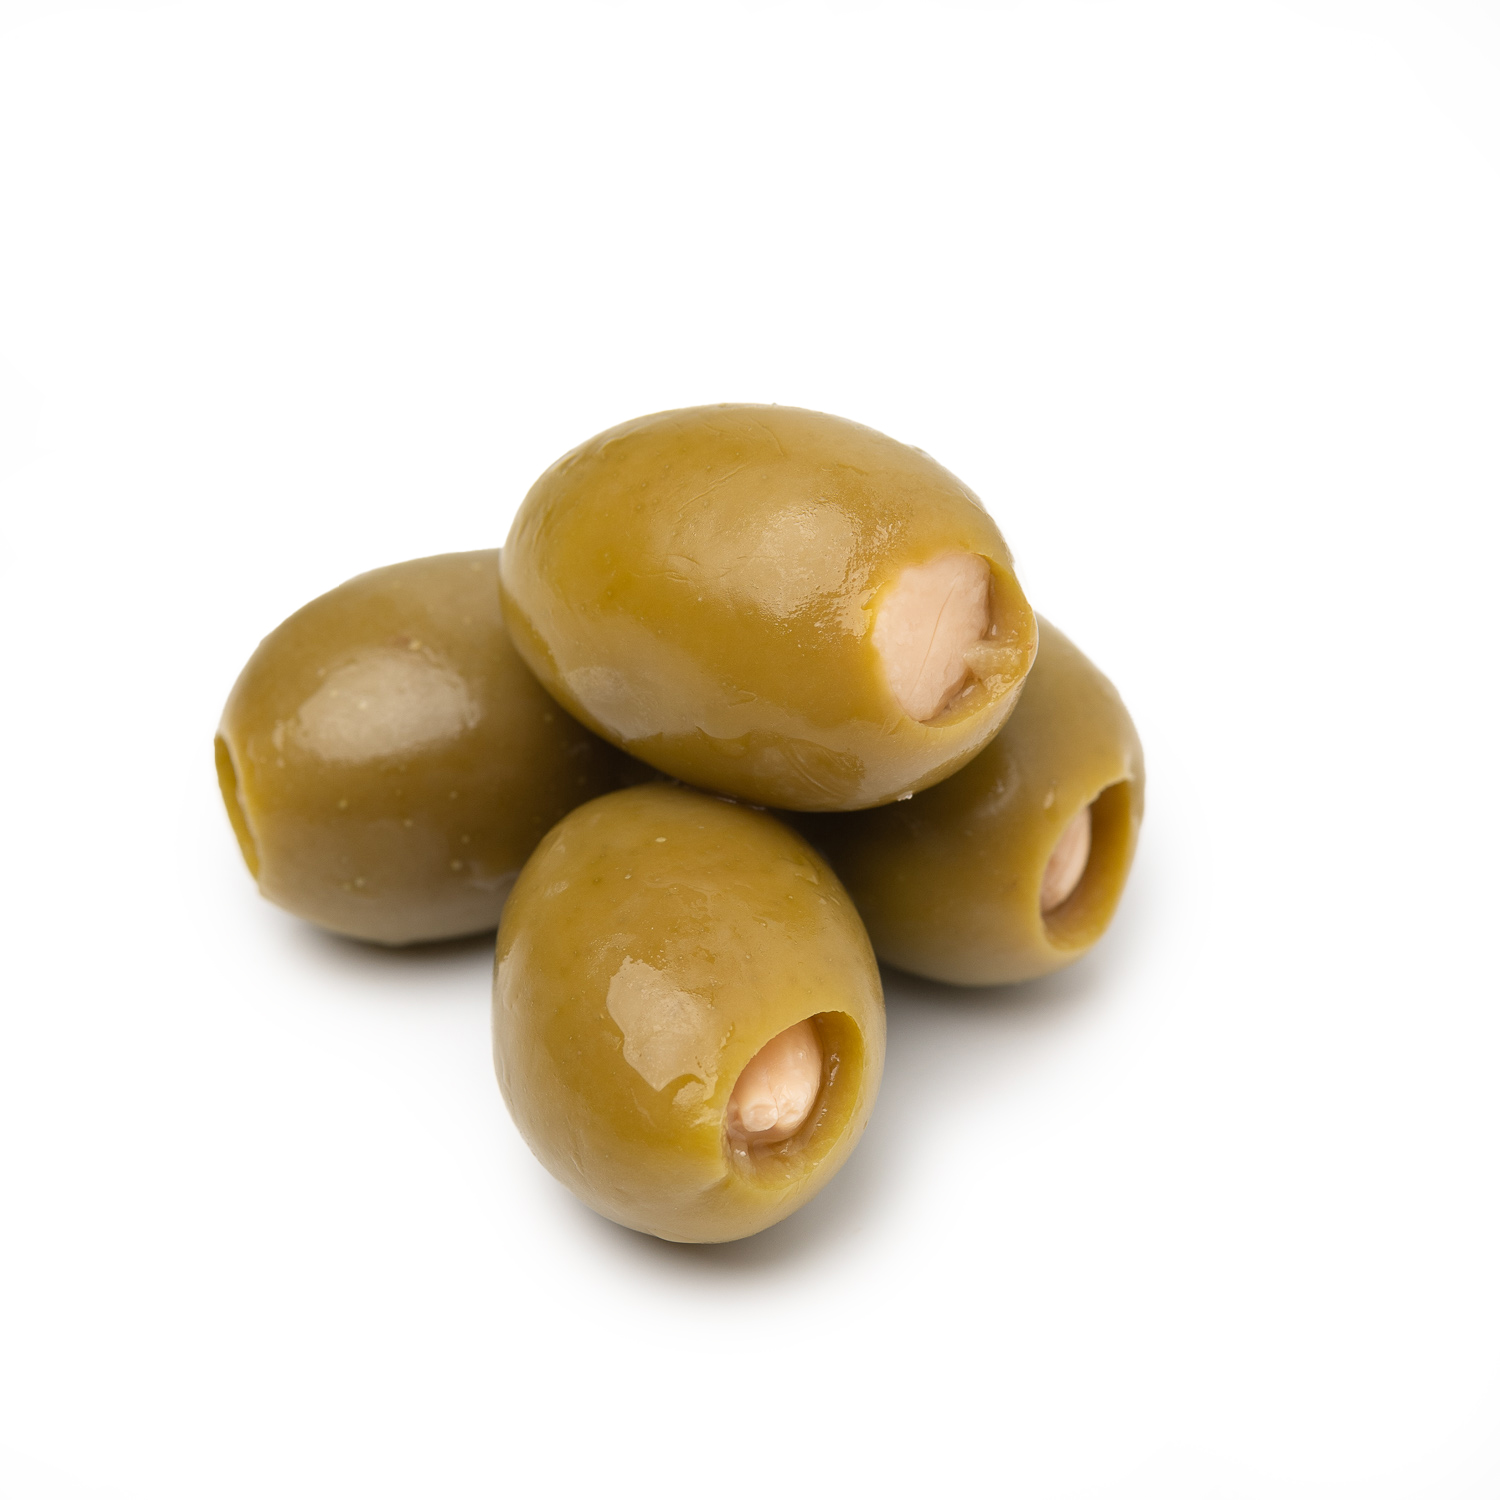 Green Olives with Garlic